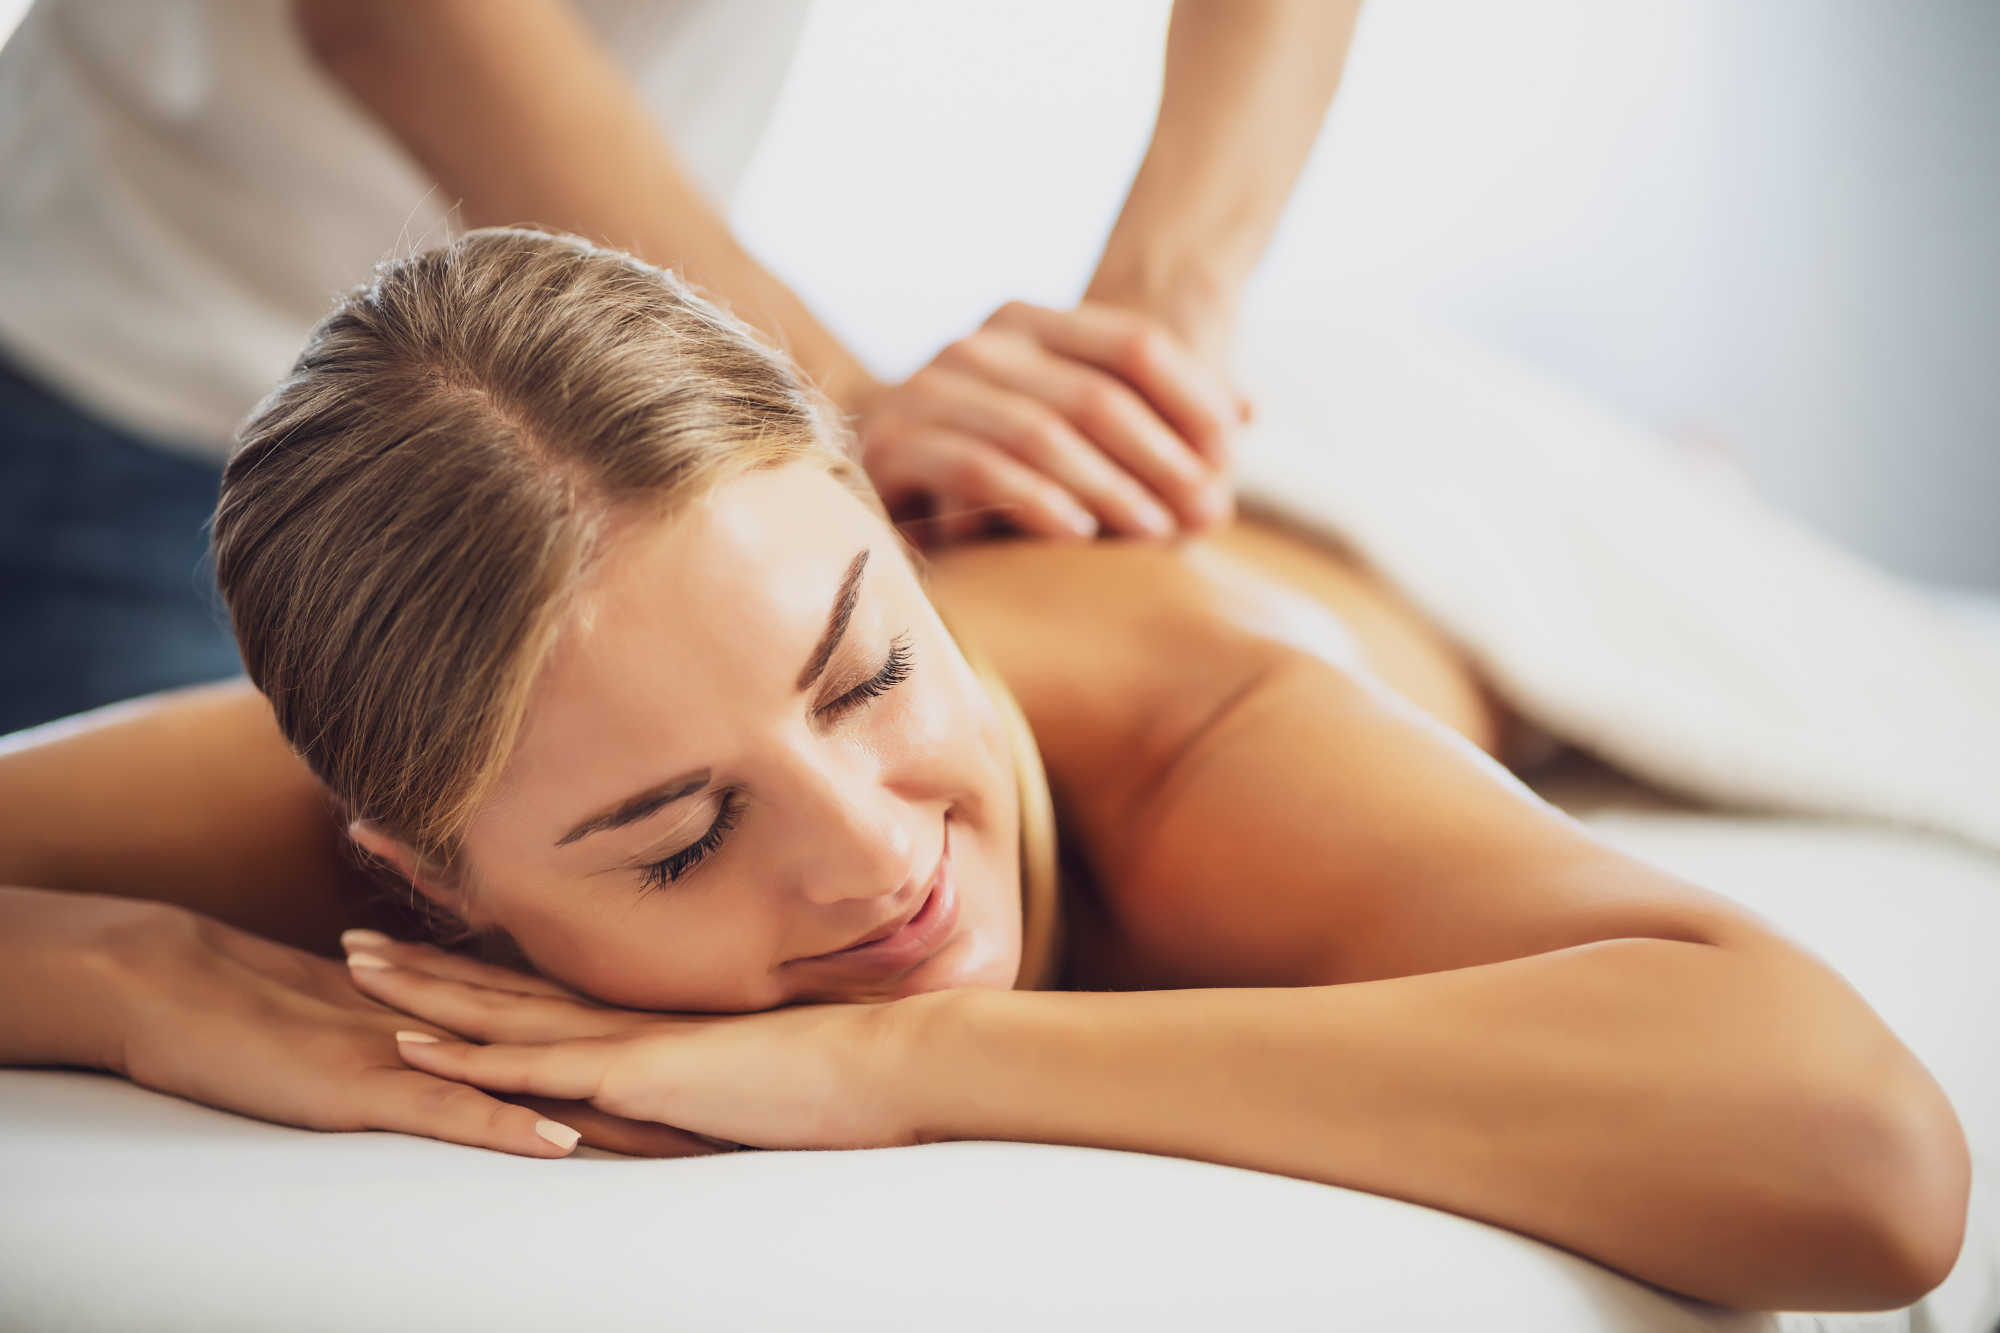 Woman smiling during massage on massage table. Can a massage per day keep divorce away, yes.